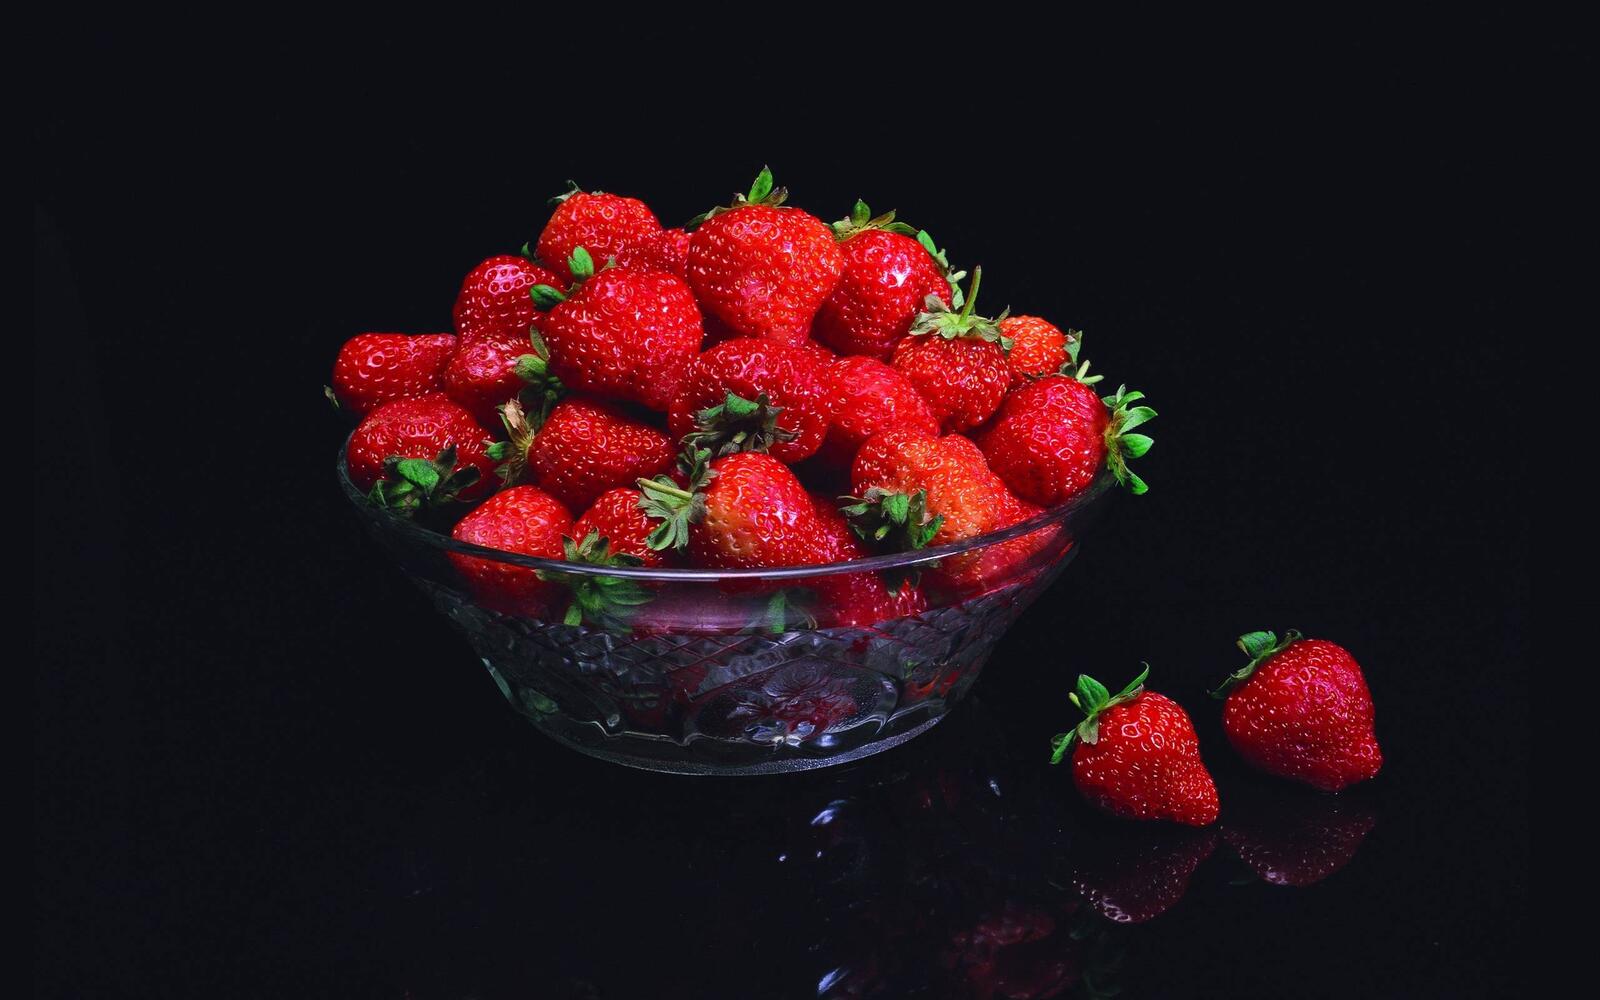 Wallpapers strawberries in the dish transparent plate black background on the desktop